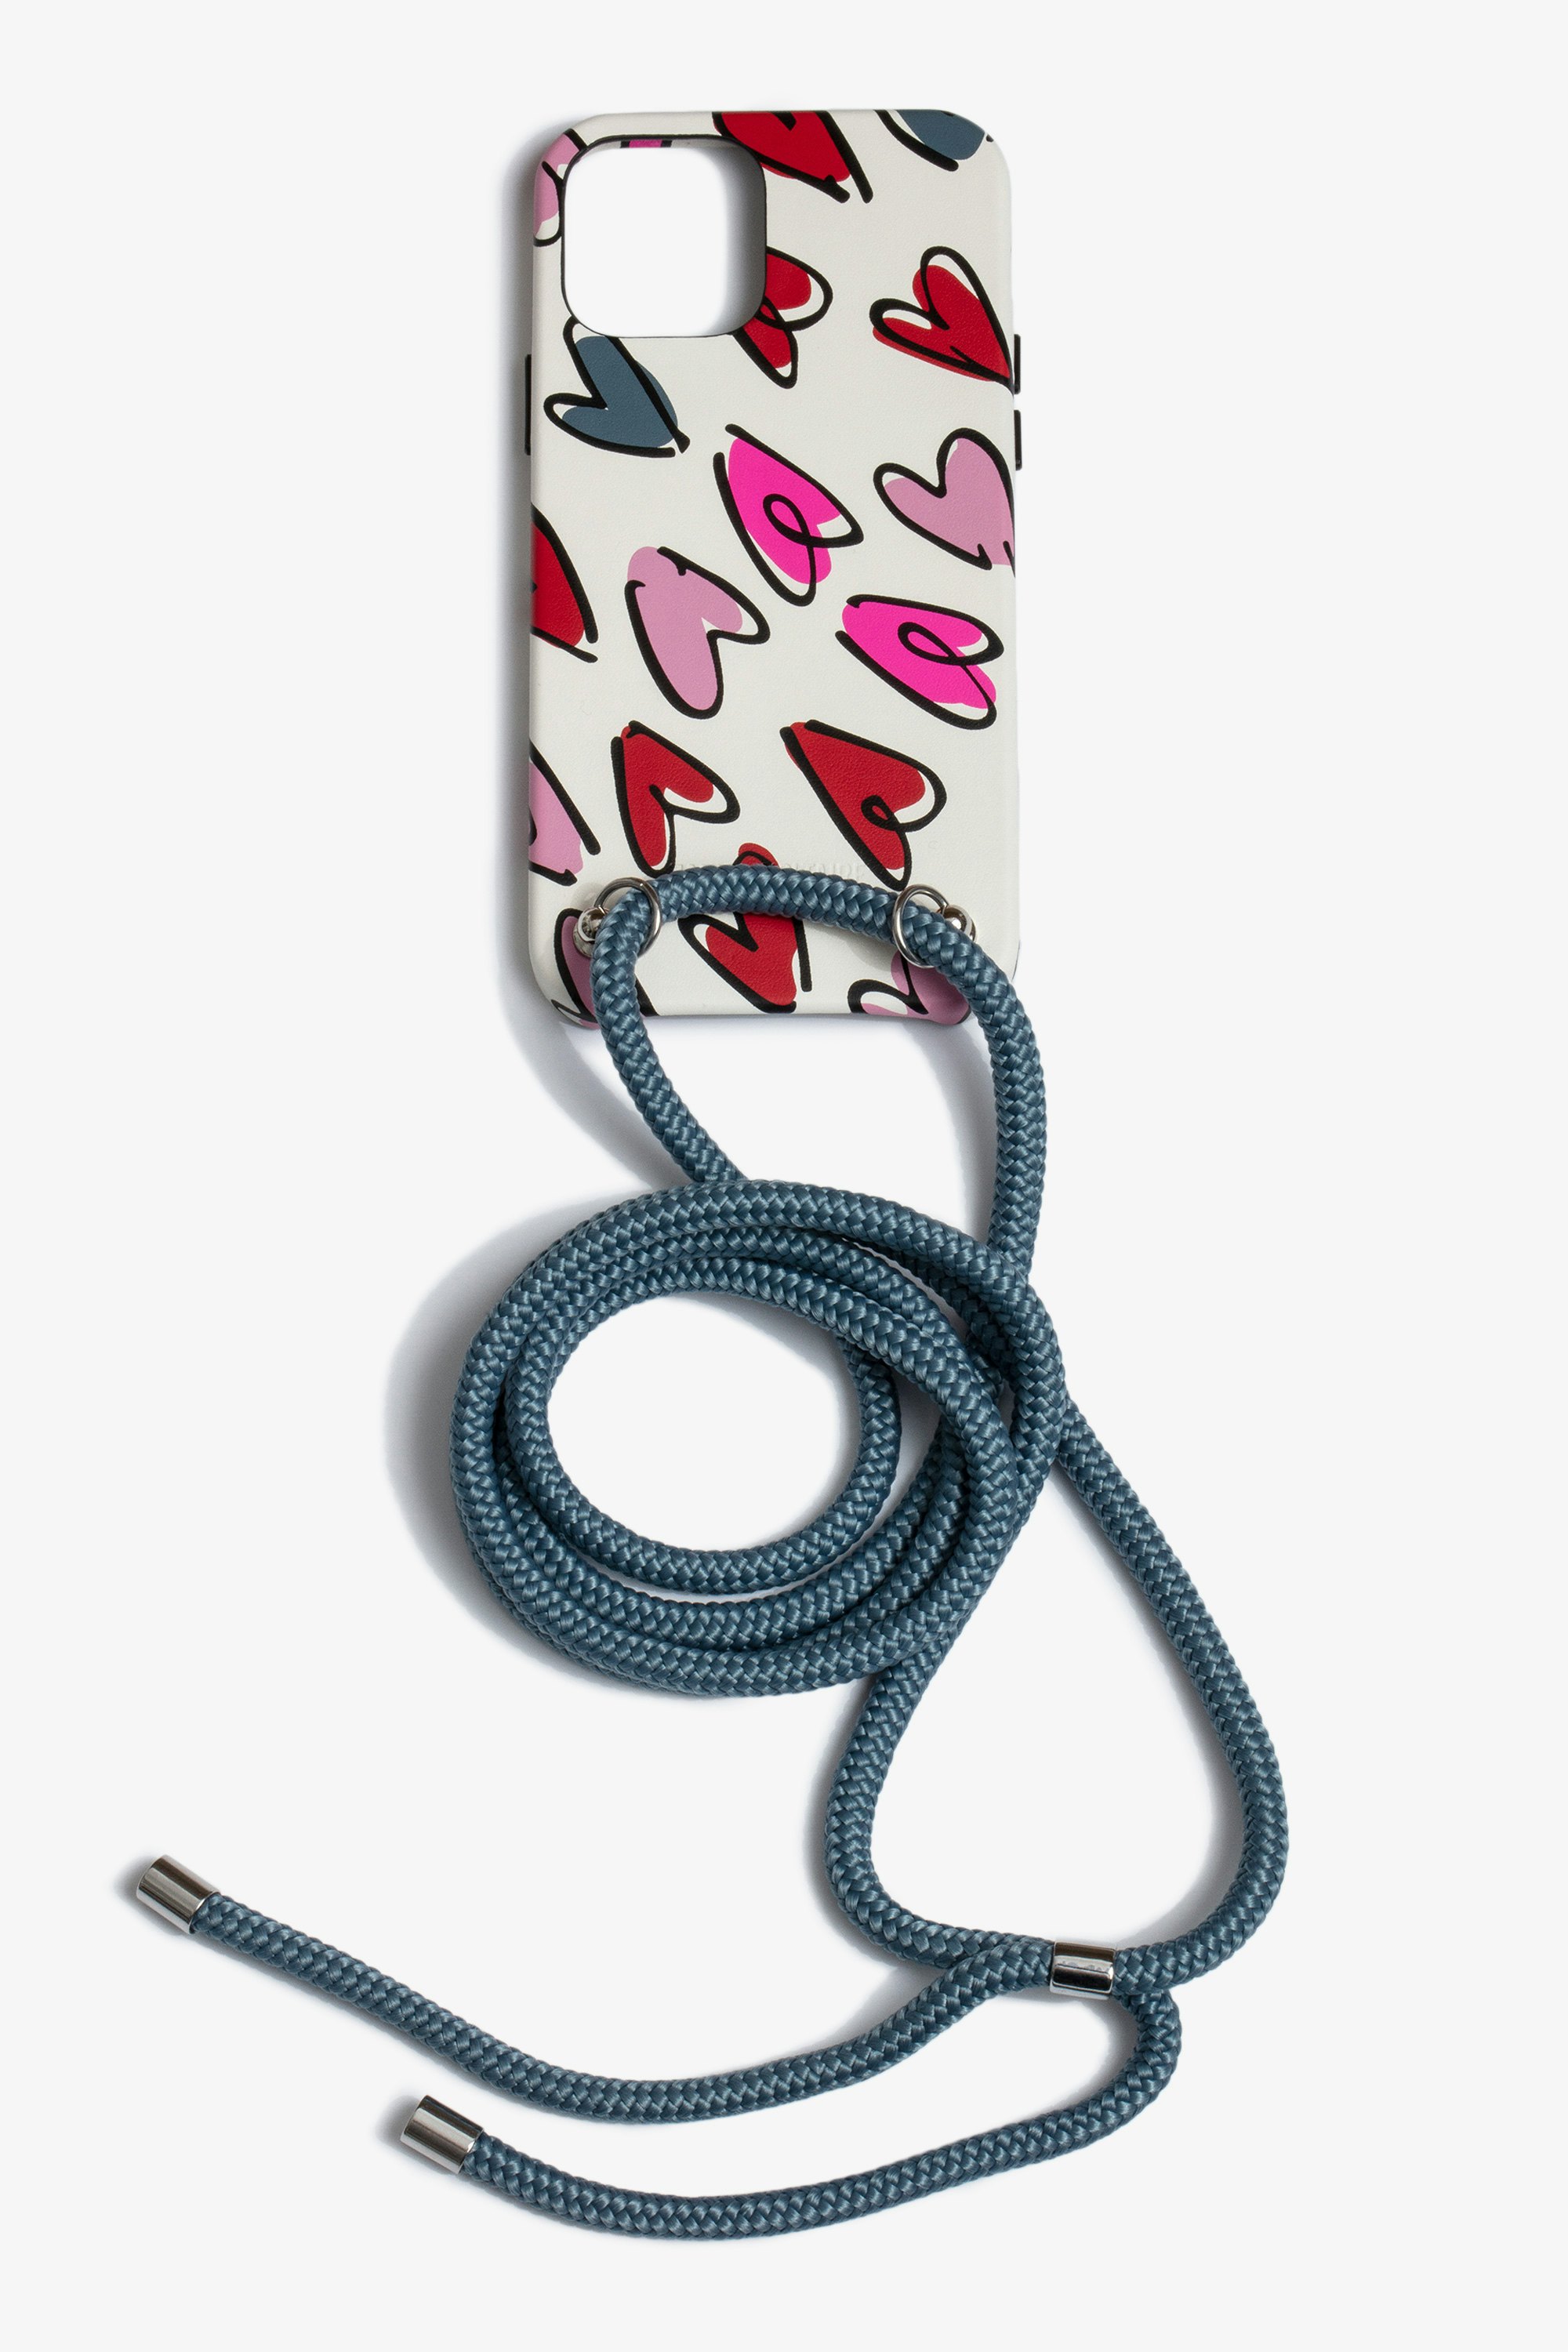 ZV Small Heart Rope iPhone 12 Cover Women’s iPhone 12 cover with a cord to wear around your neck